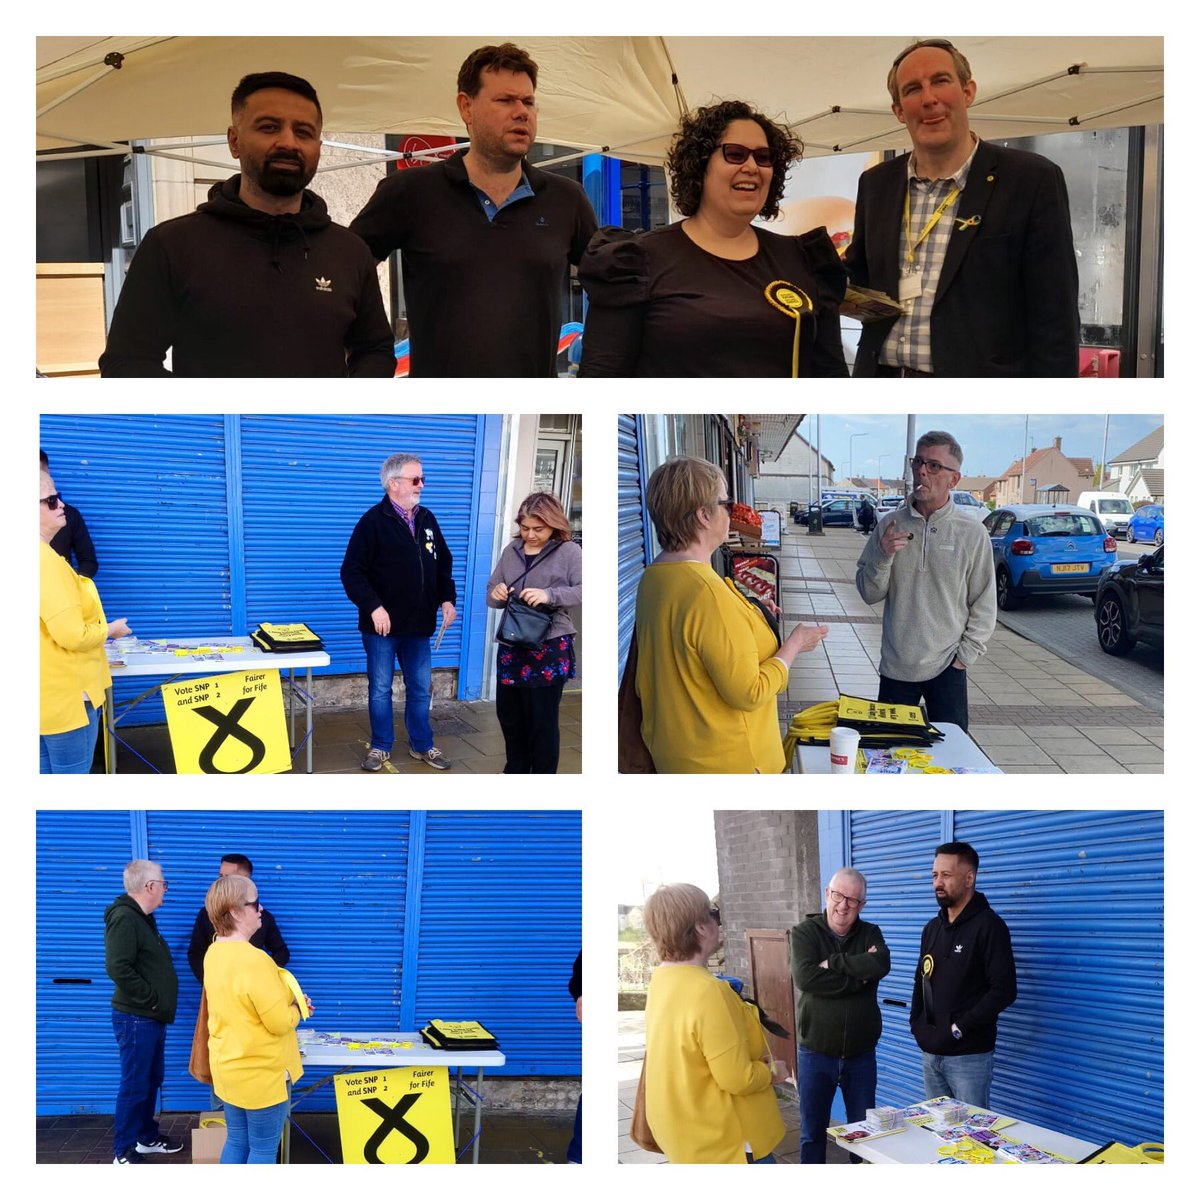 All over @SnpDunfermline @snpfife1 #ForFife22 we are working tirelessly for every vote.

#Council22 
#VoteSNP